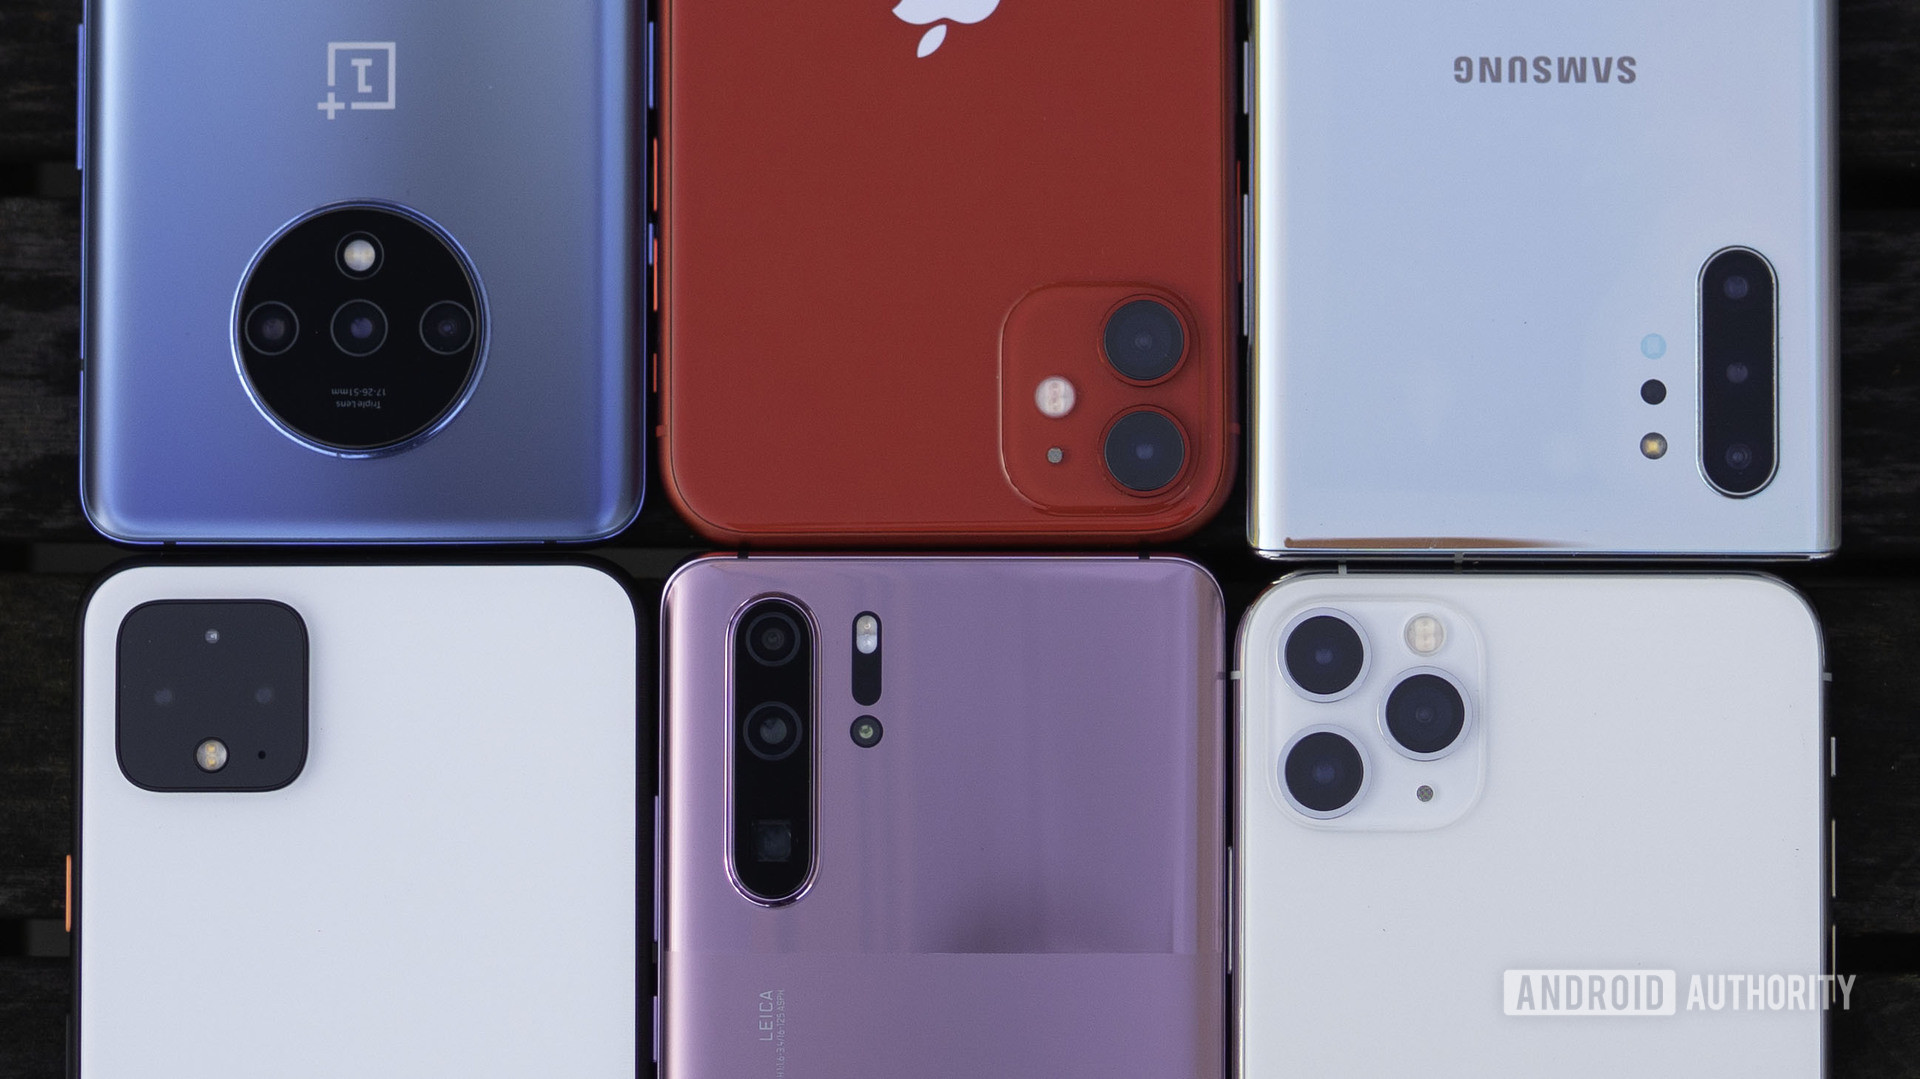 Phone storage space comparison - OnePlus 7T, iPhone 11, Google Pixel 4, Huawei P30 Pro, iPhone 11 Pro, Samsung Galaxy Note 10 Plus face down on a table